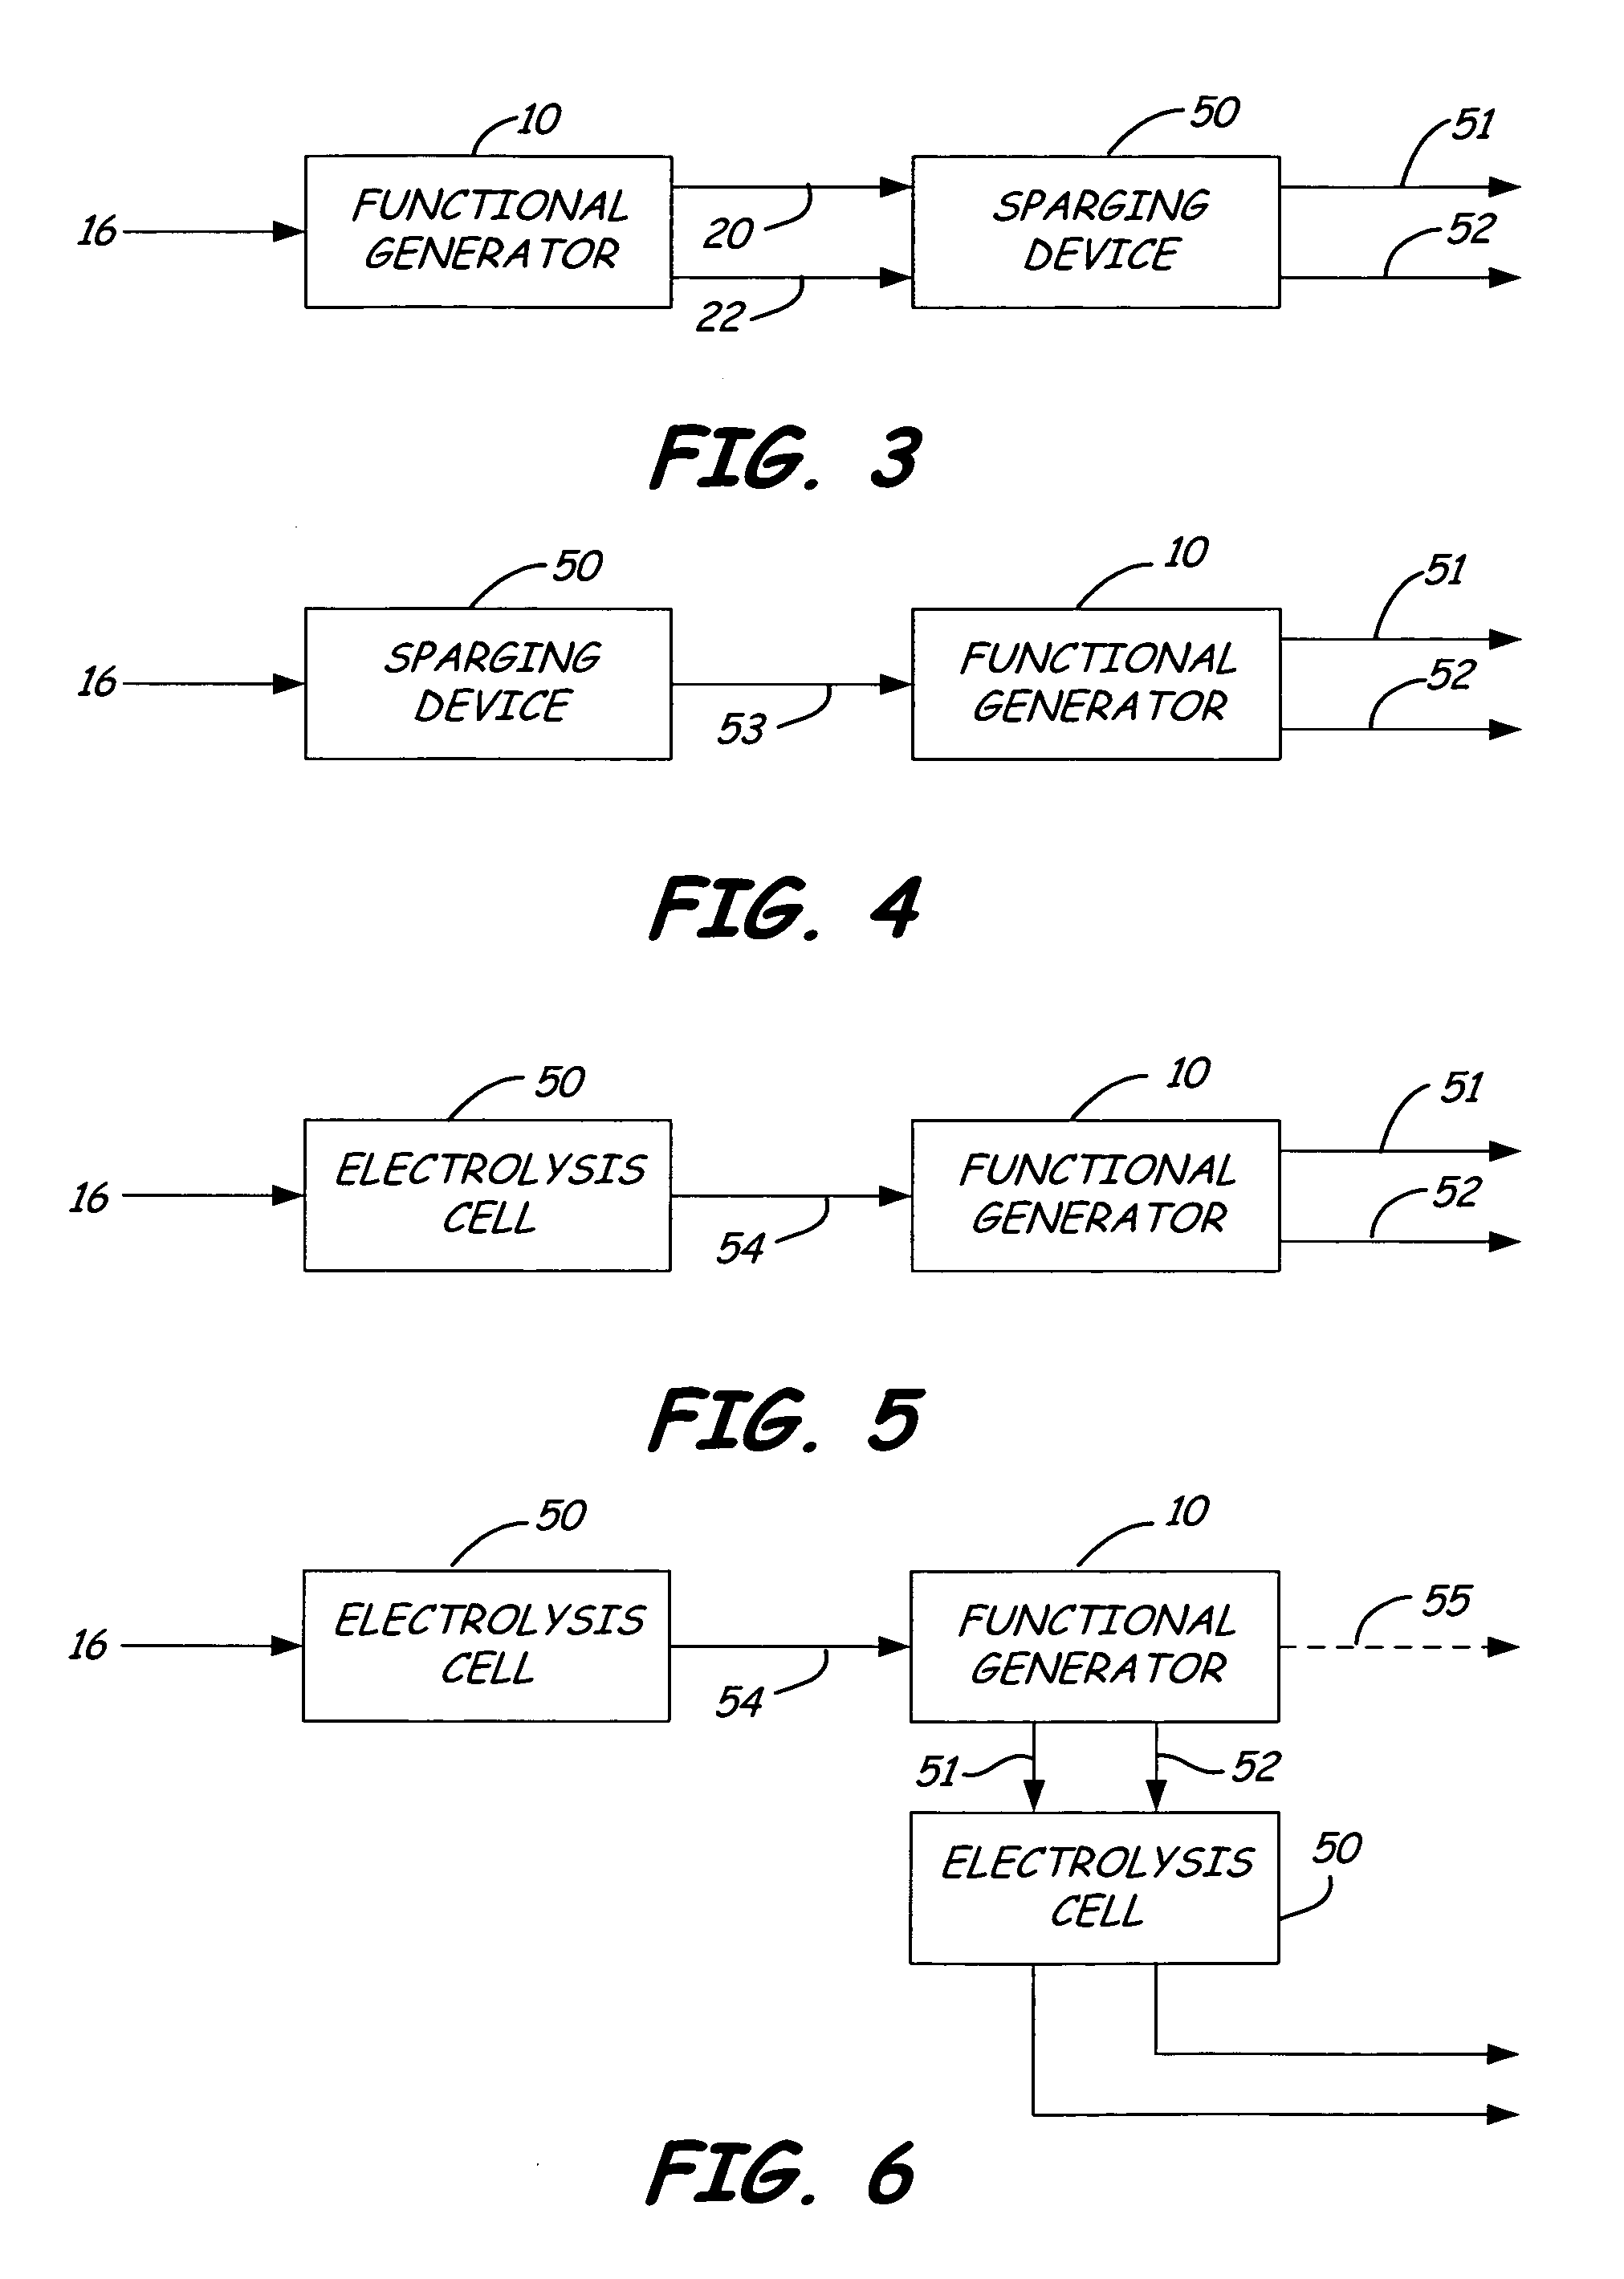 Mobile surface cleaner having a sparging device